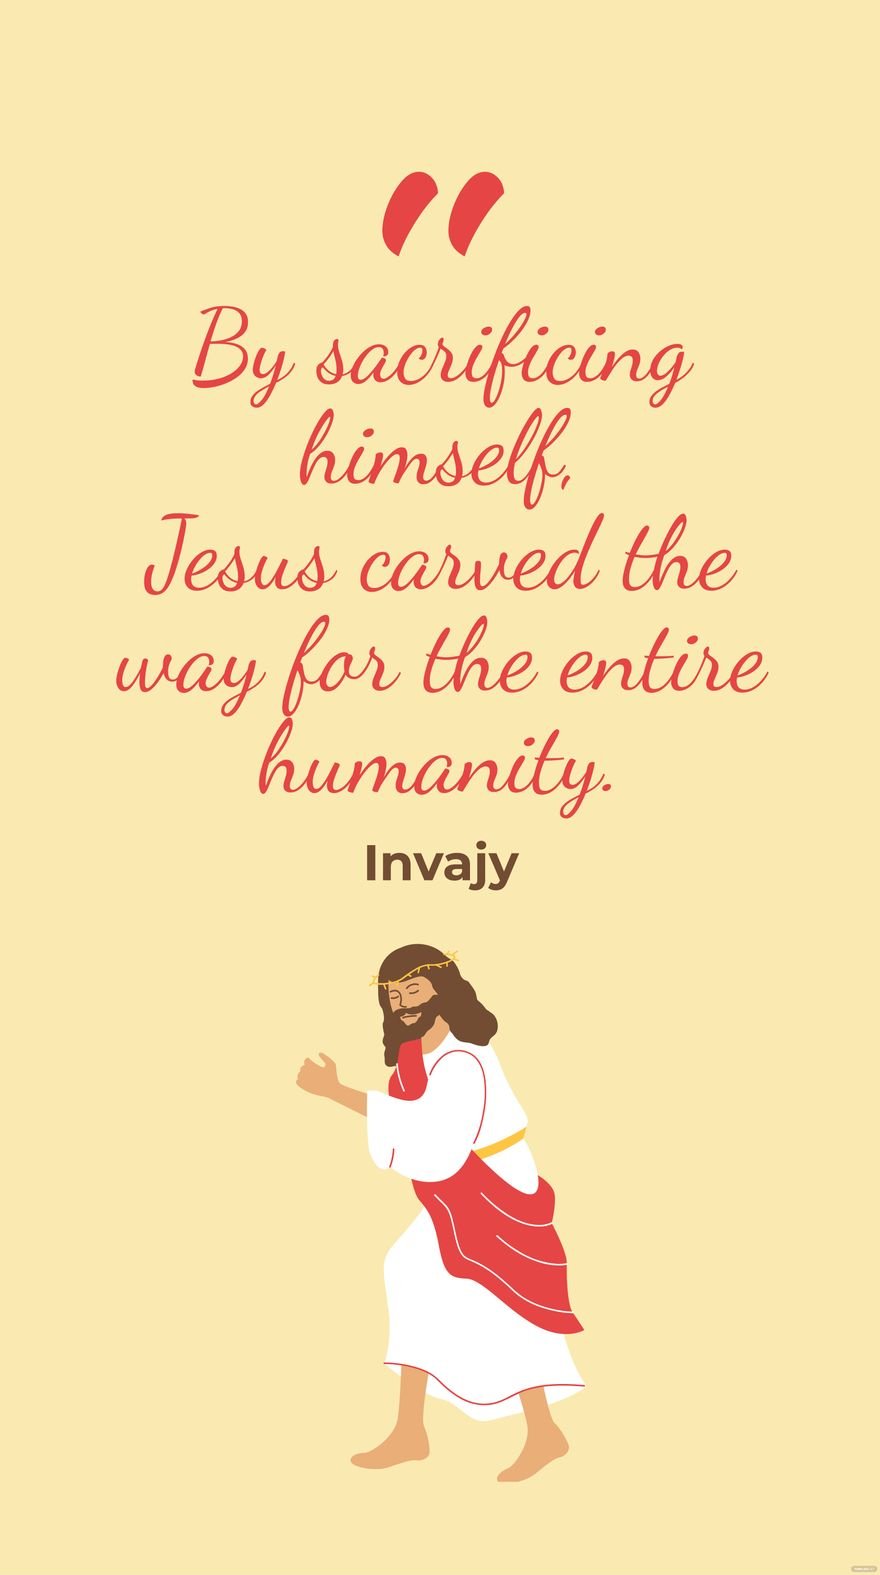 Invajy - By sacrificing himself, Jesus carved the way for the entire humanity. in JPG